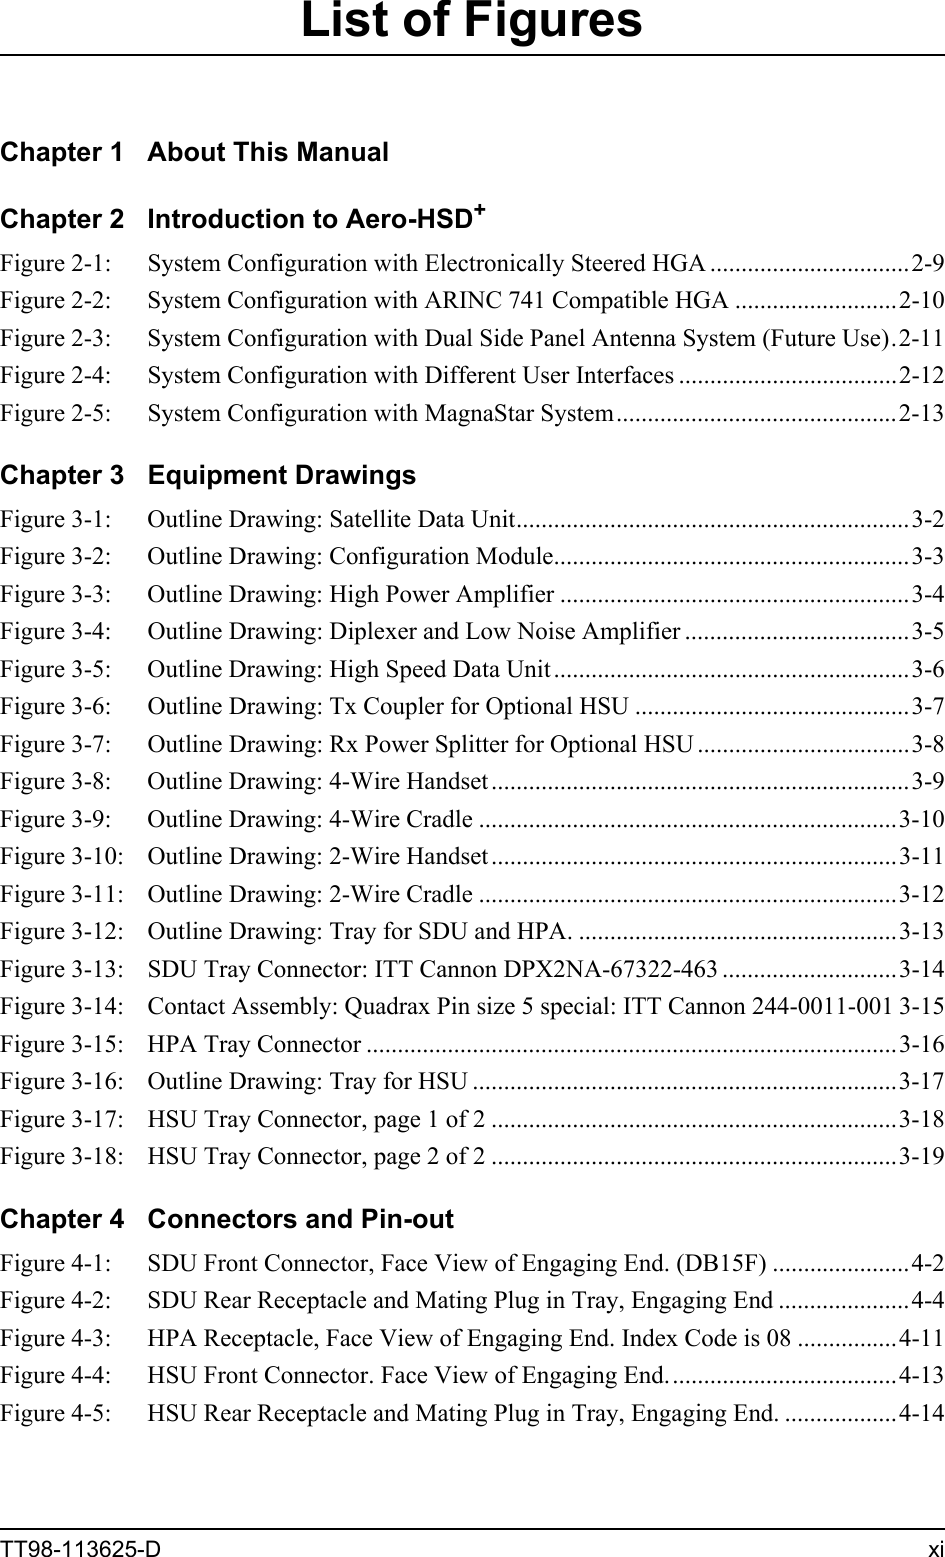 TT98-113625-D xiList of FiguresChapter 1 About This ManualChapter 2 Introduction to Aero-HSD+Figure 2-1: System Configuration with Electronically Steered HGA ................................2-9Figure 2-2: System Configuration with ARINC 741 Compatible HGA ..........................2-10Figure 2-3: System Configuration with Dual Side Panel Antenna System (Future Use).2-11Figure 2-4: System Configuration with Different User Interfaces ...................................2-12Figure 2-5: System Configuration with MagnaStar System.............................................2-13Chapter 3 Equipment DrawingsFigure 3-1: Outline Drawing: Satellite Data Unit...............................................................3-2Figure 3-2: Outline Drawing: Configuration Module.........................................................3-3Figure 3-3: Outline Drawing: High Power Amplifier ........................................................3-4Figure 3-4: Outline Drawing: Diplexer and Low Noise Amplifier ....................................3-5Figure 3-5: Outline Drawing: High Speed Data Unit .........................................................3-6Figure 3-6: Outline Drawing: Tx Coupler for Optional HSU ............................................3-7Figure 3-7: Outline Drawing: Rx Power Splitter for Optional HSU ..................................3-8Figure 3-8: Outline Drawing: 4-Wire Handset...................................................................3-9Figure 3-9: Outline Drawing: 4-Wire Cradle ...................................................................3-10Figure 3-10: Outline Drawing: 2-Wire Handset.................................................................3-11Figure 3-11: Outline Drawing: 2-Wire Cradle ...................................................................3-12Figure 3-12: Outline Drawing: Tray for SDU and HPA. ...................................................3-13Figure 3-13: SDU Tray Connector: ITT Cannon DPX2NA-67322-463 ............................3-14Figure 3-14: Contact Assembly: Quadrax Pin size 5 special: ITT Cannon 244-0011-001 3-15Figure 3-15: HPA Tray Connector .....................................................................................3-16Figure 3-16: Outline Drawing: Tray for HSU ....................................................................3-17Figure 3-17: HSU Tray Connector, page 1 of 2 .................................................................3-18Figure 3-18: HSU Tray Connector, page 2 of 2 .................................................................3-19Chapter 4 Connectors and Pin-outFigure 4-1: SDU Front Connector, Face View of Engaging End. (DB15F) ......................4-2Figure 4-2: SDU Rear Receptacle and Mating Plug in Tray, Engaging End .....................4-4Figure 4-3: HPA Receptacle, Face View of Engaging End. Index Code is 08 ................4-11Figure 4-4: HSU Front Connector. Face View of Engaging End.....................................4-13Figure 4-5: HSU Rear Receptacle and Mating Plug in Tray, Engaging End. ..................4-14